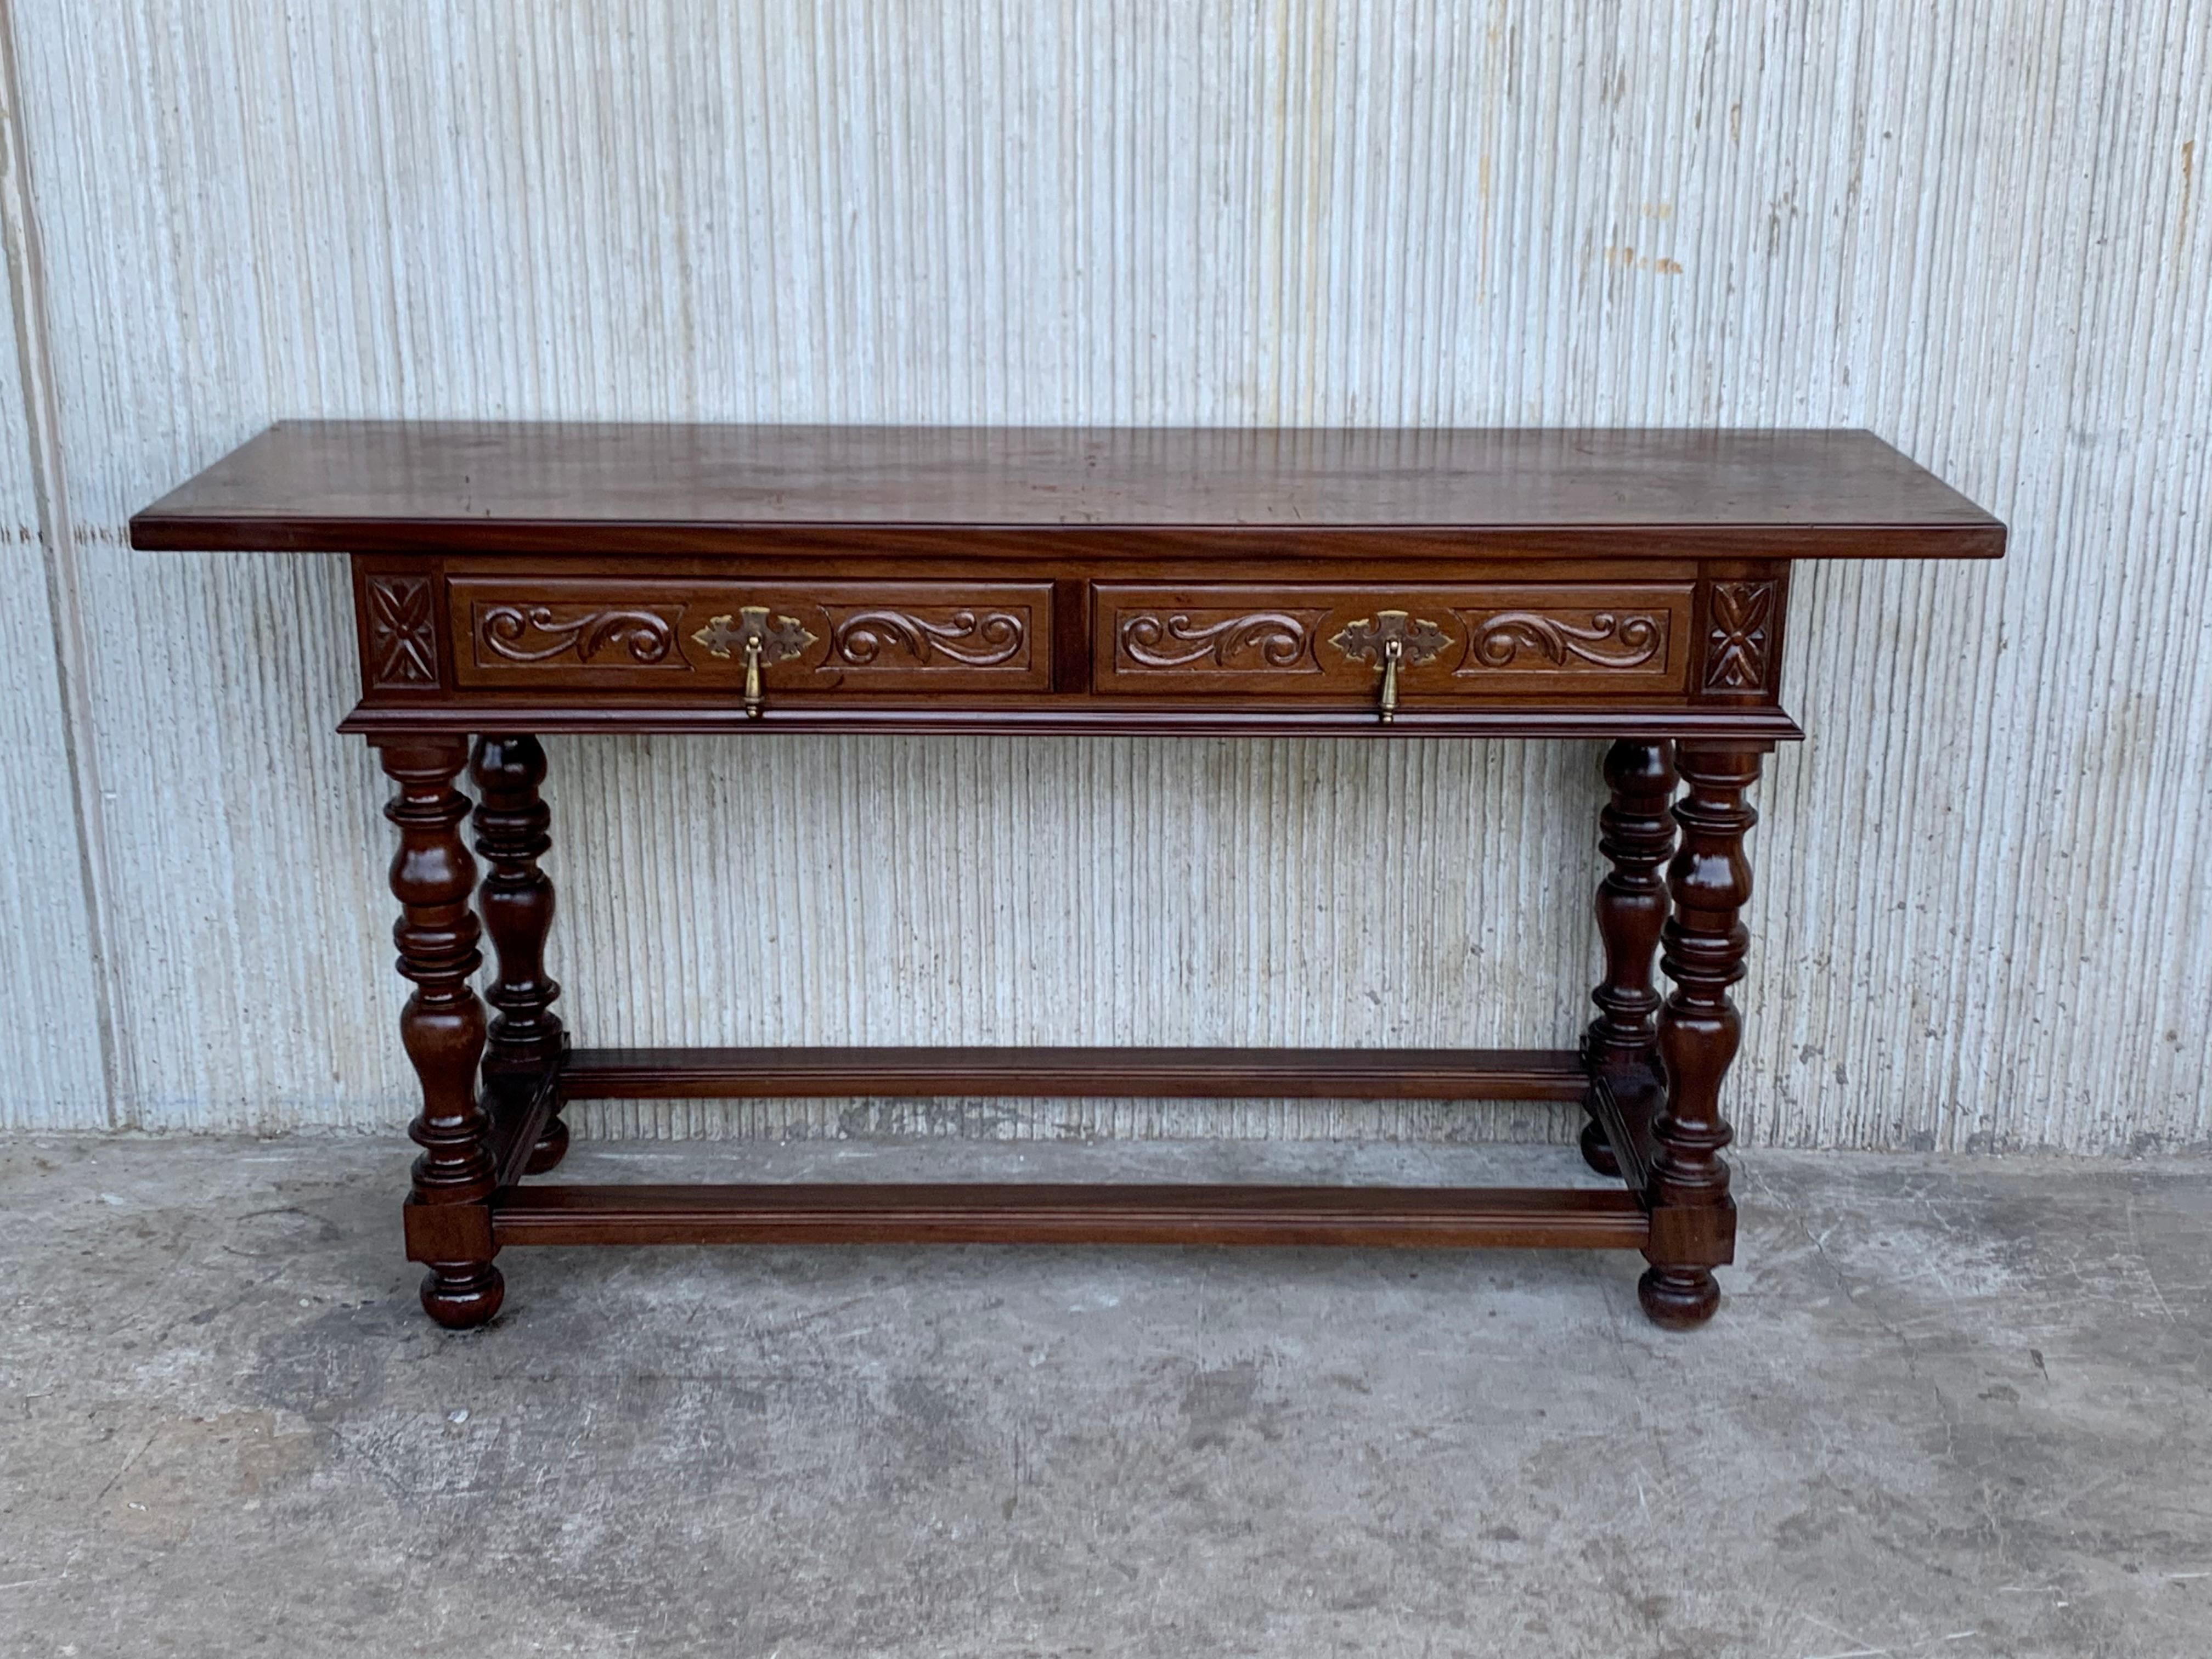 Baroque 20th Century Spanish Tuscan Console Table with Two Drawers and Turned Legs